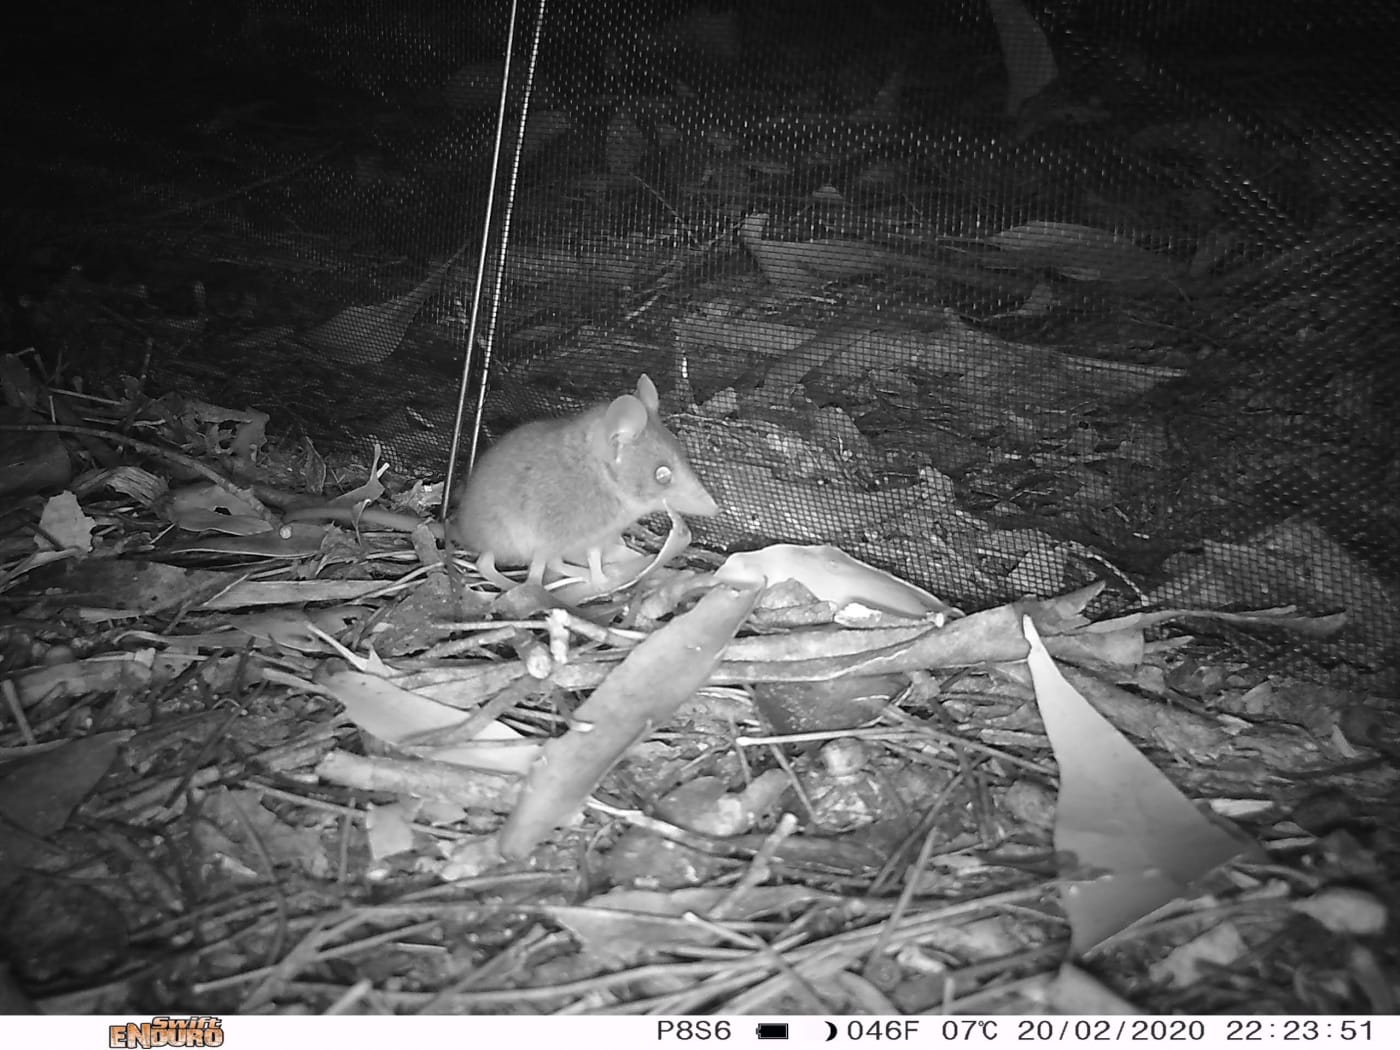 A Kangaroo Island dunnart captured on camera at the new site